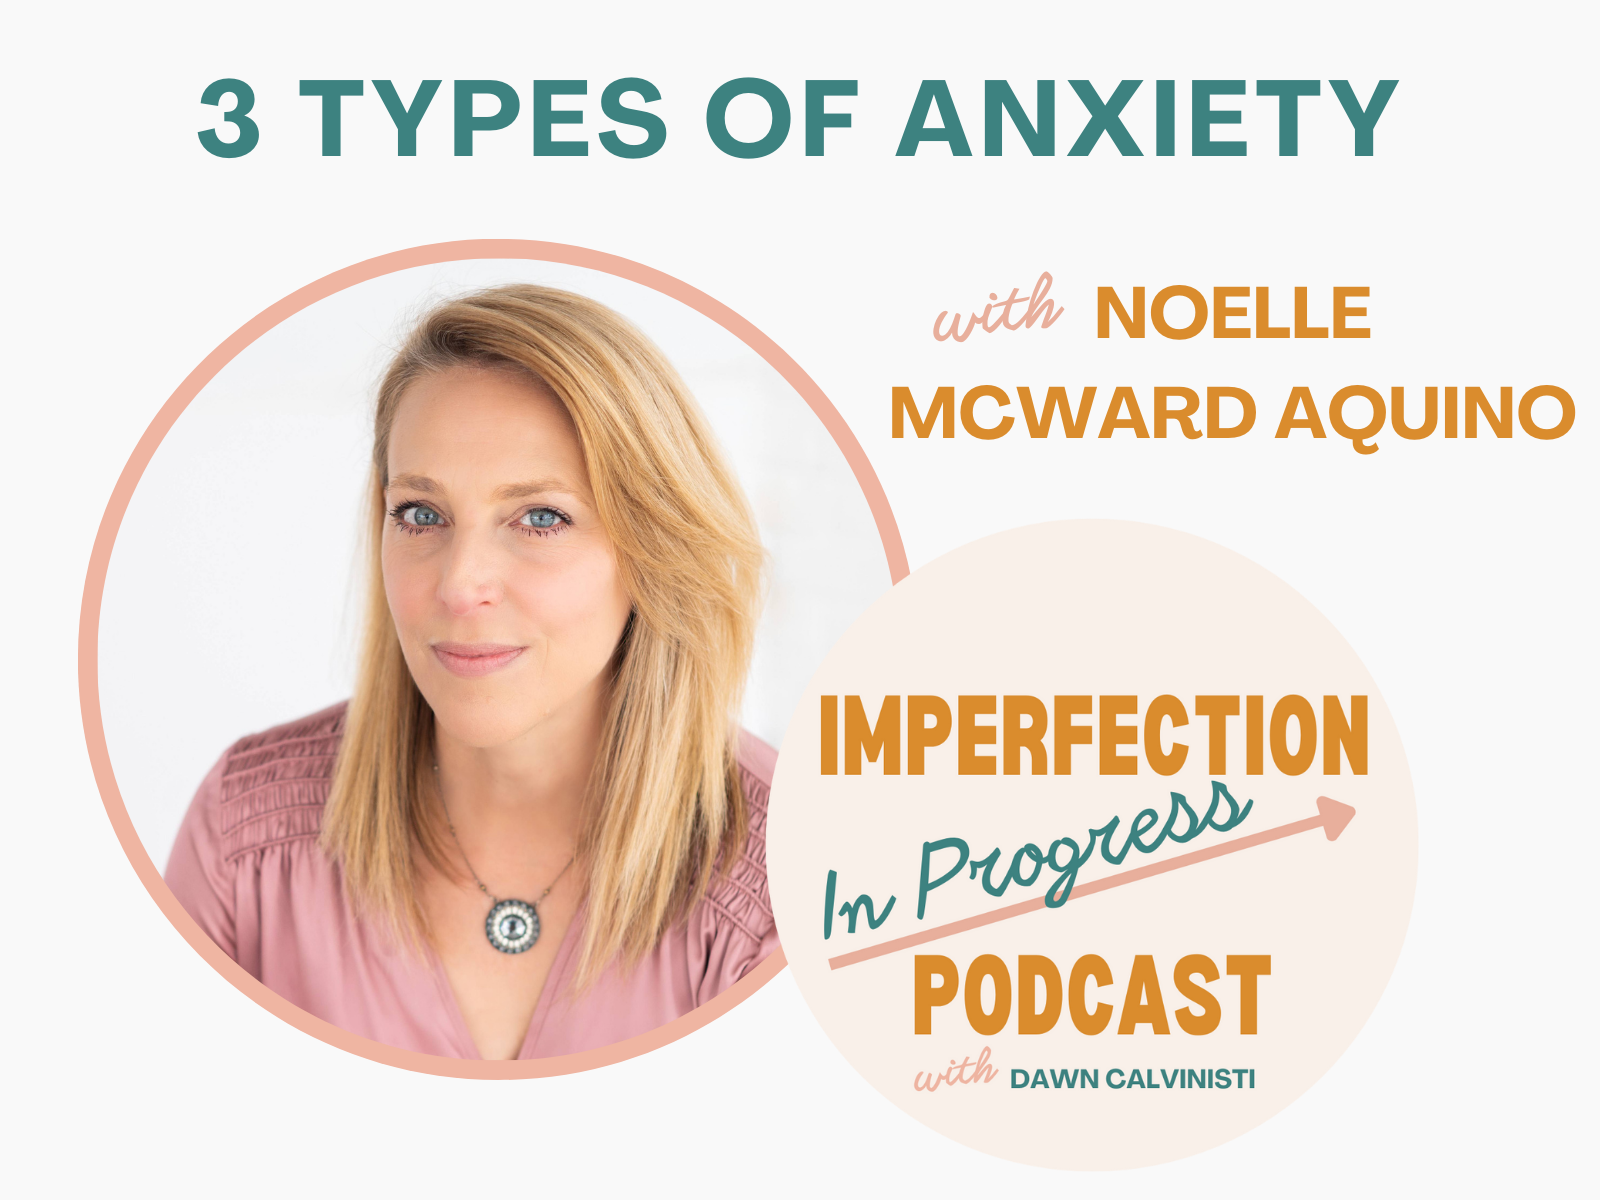 3 Types of Anxiety with Noelle McWard Aquino